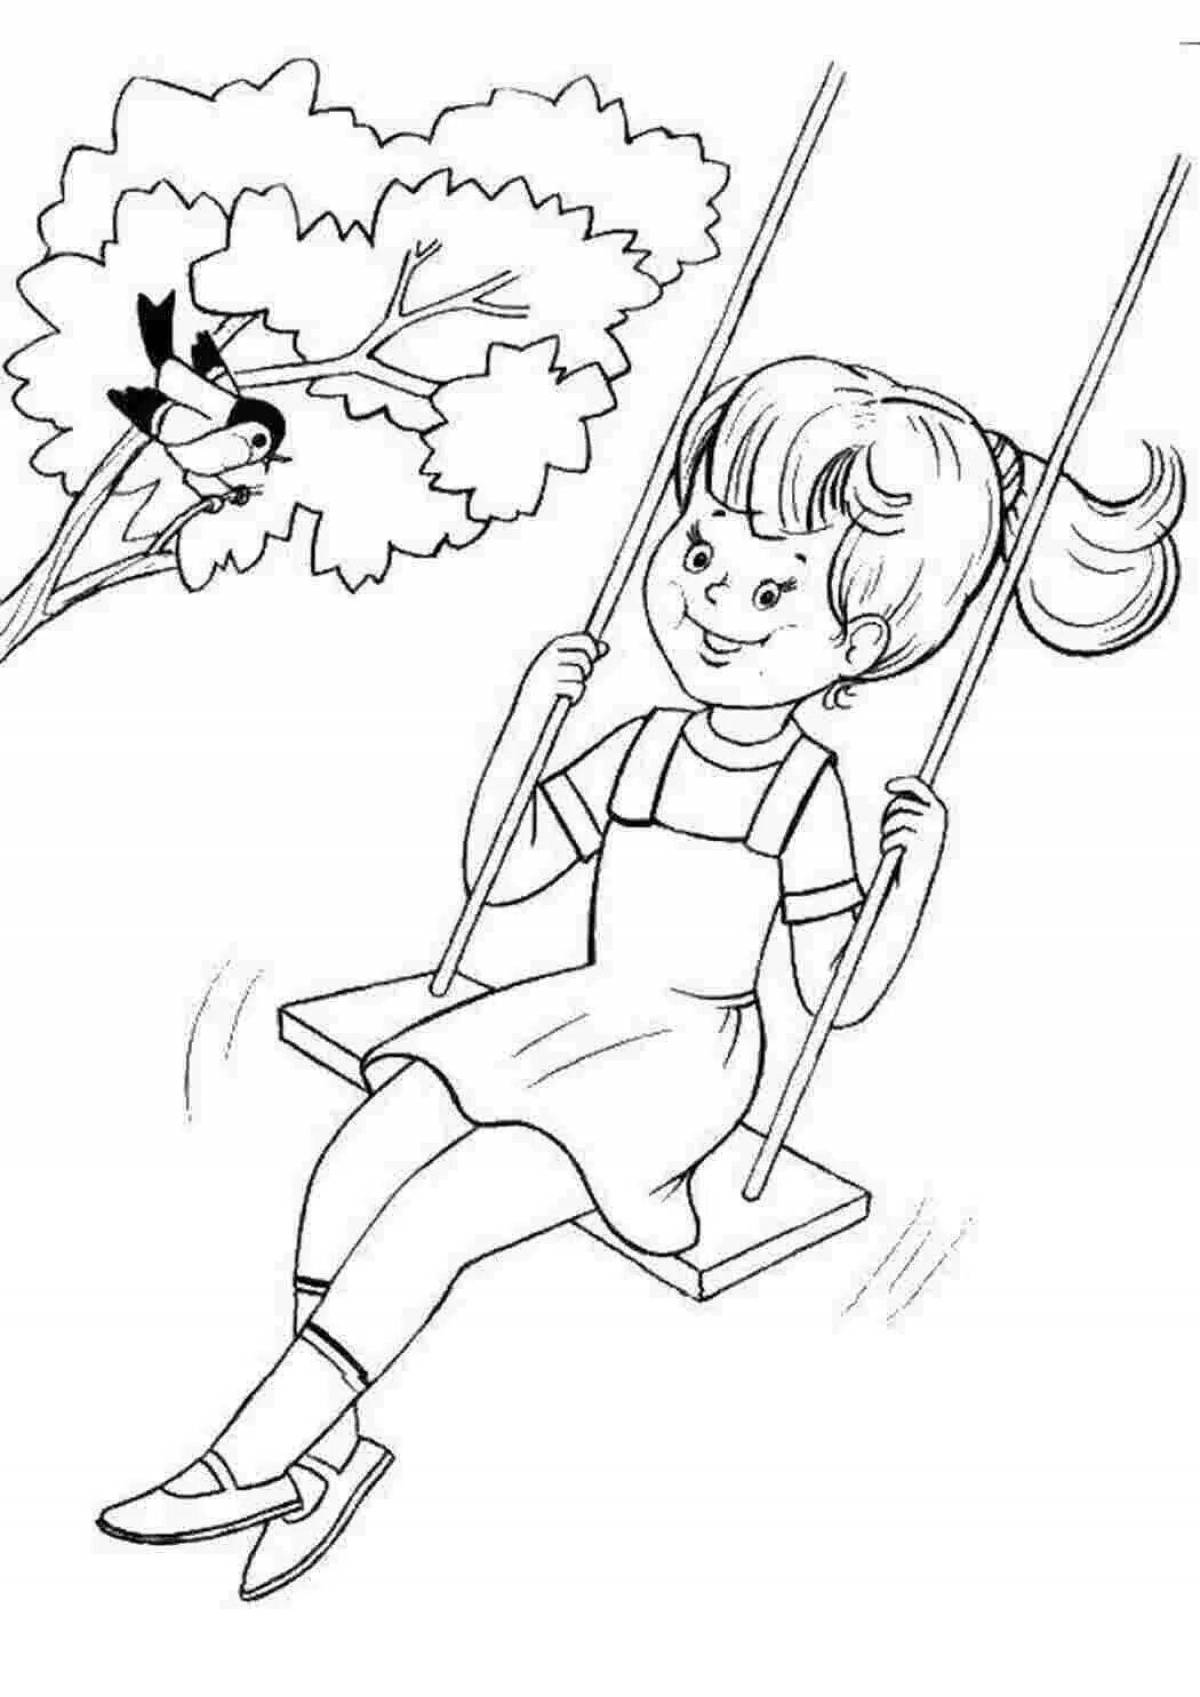 Coloring page excited girl on a swing